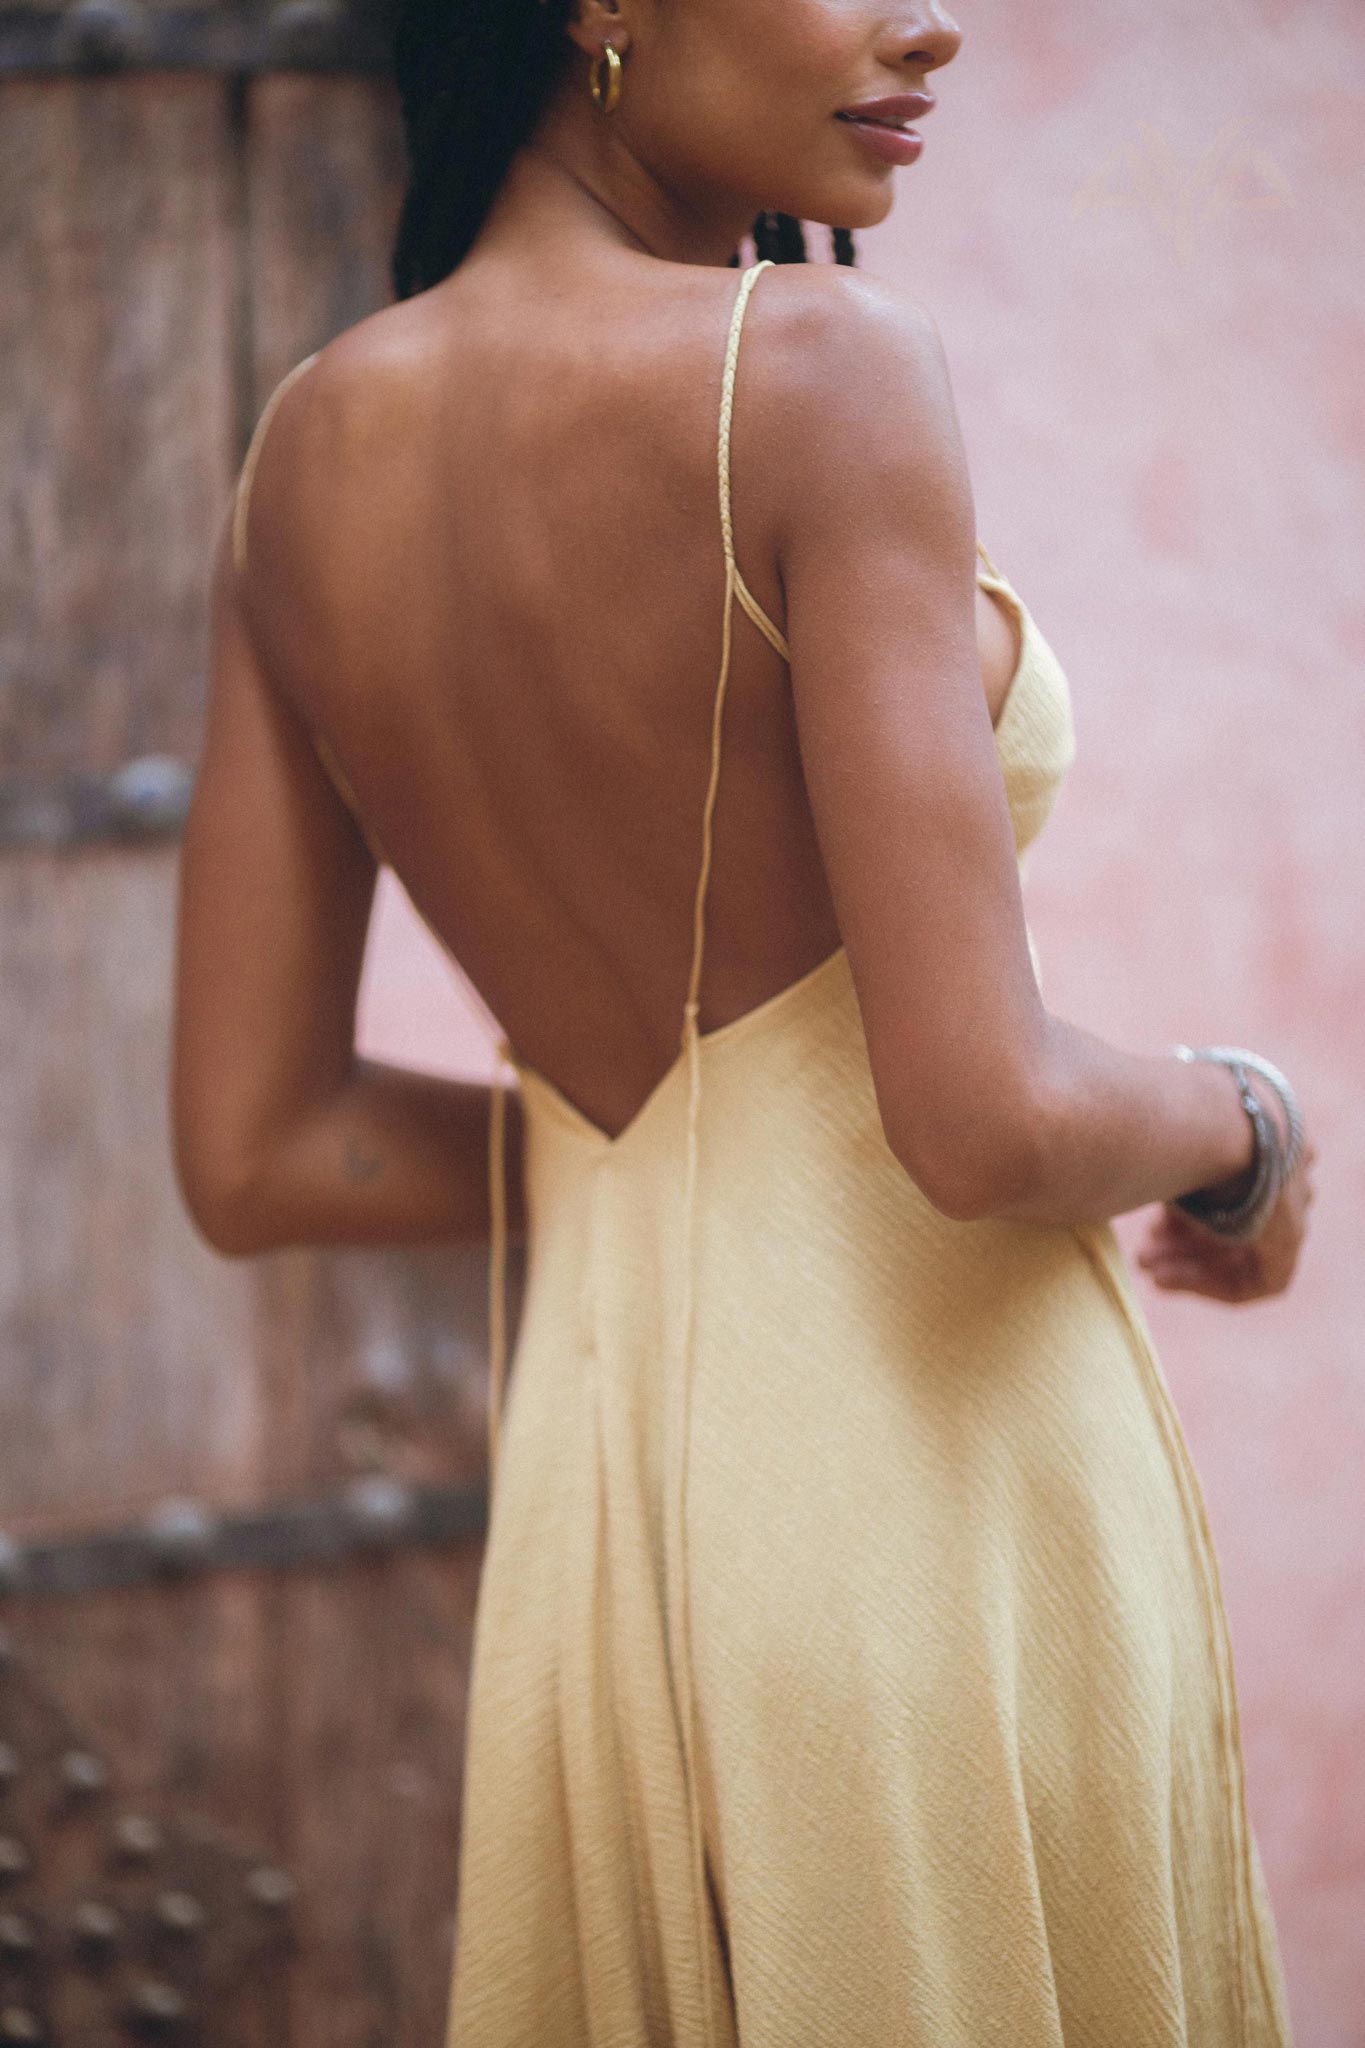 Refresh your wardrobe with the powder yellow dress from Aya Sacred Wear.